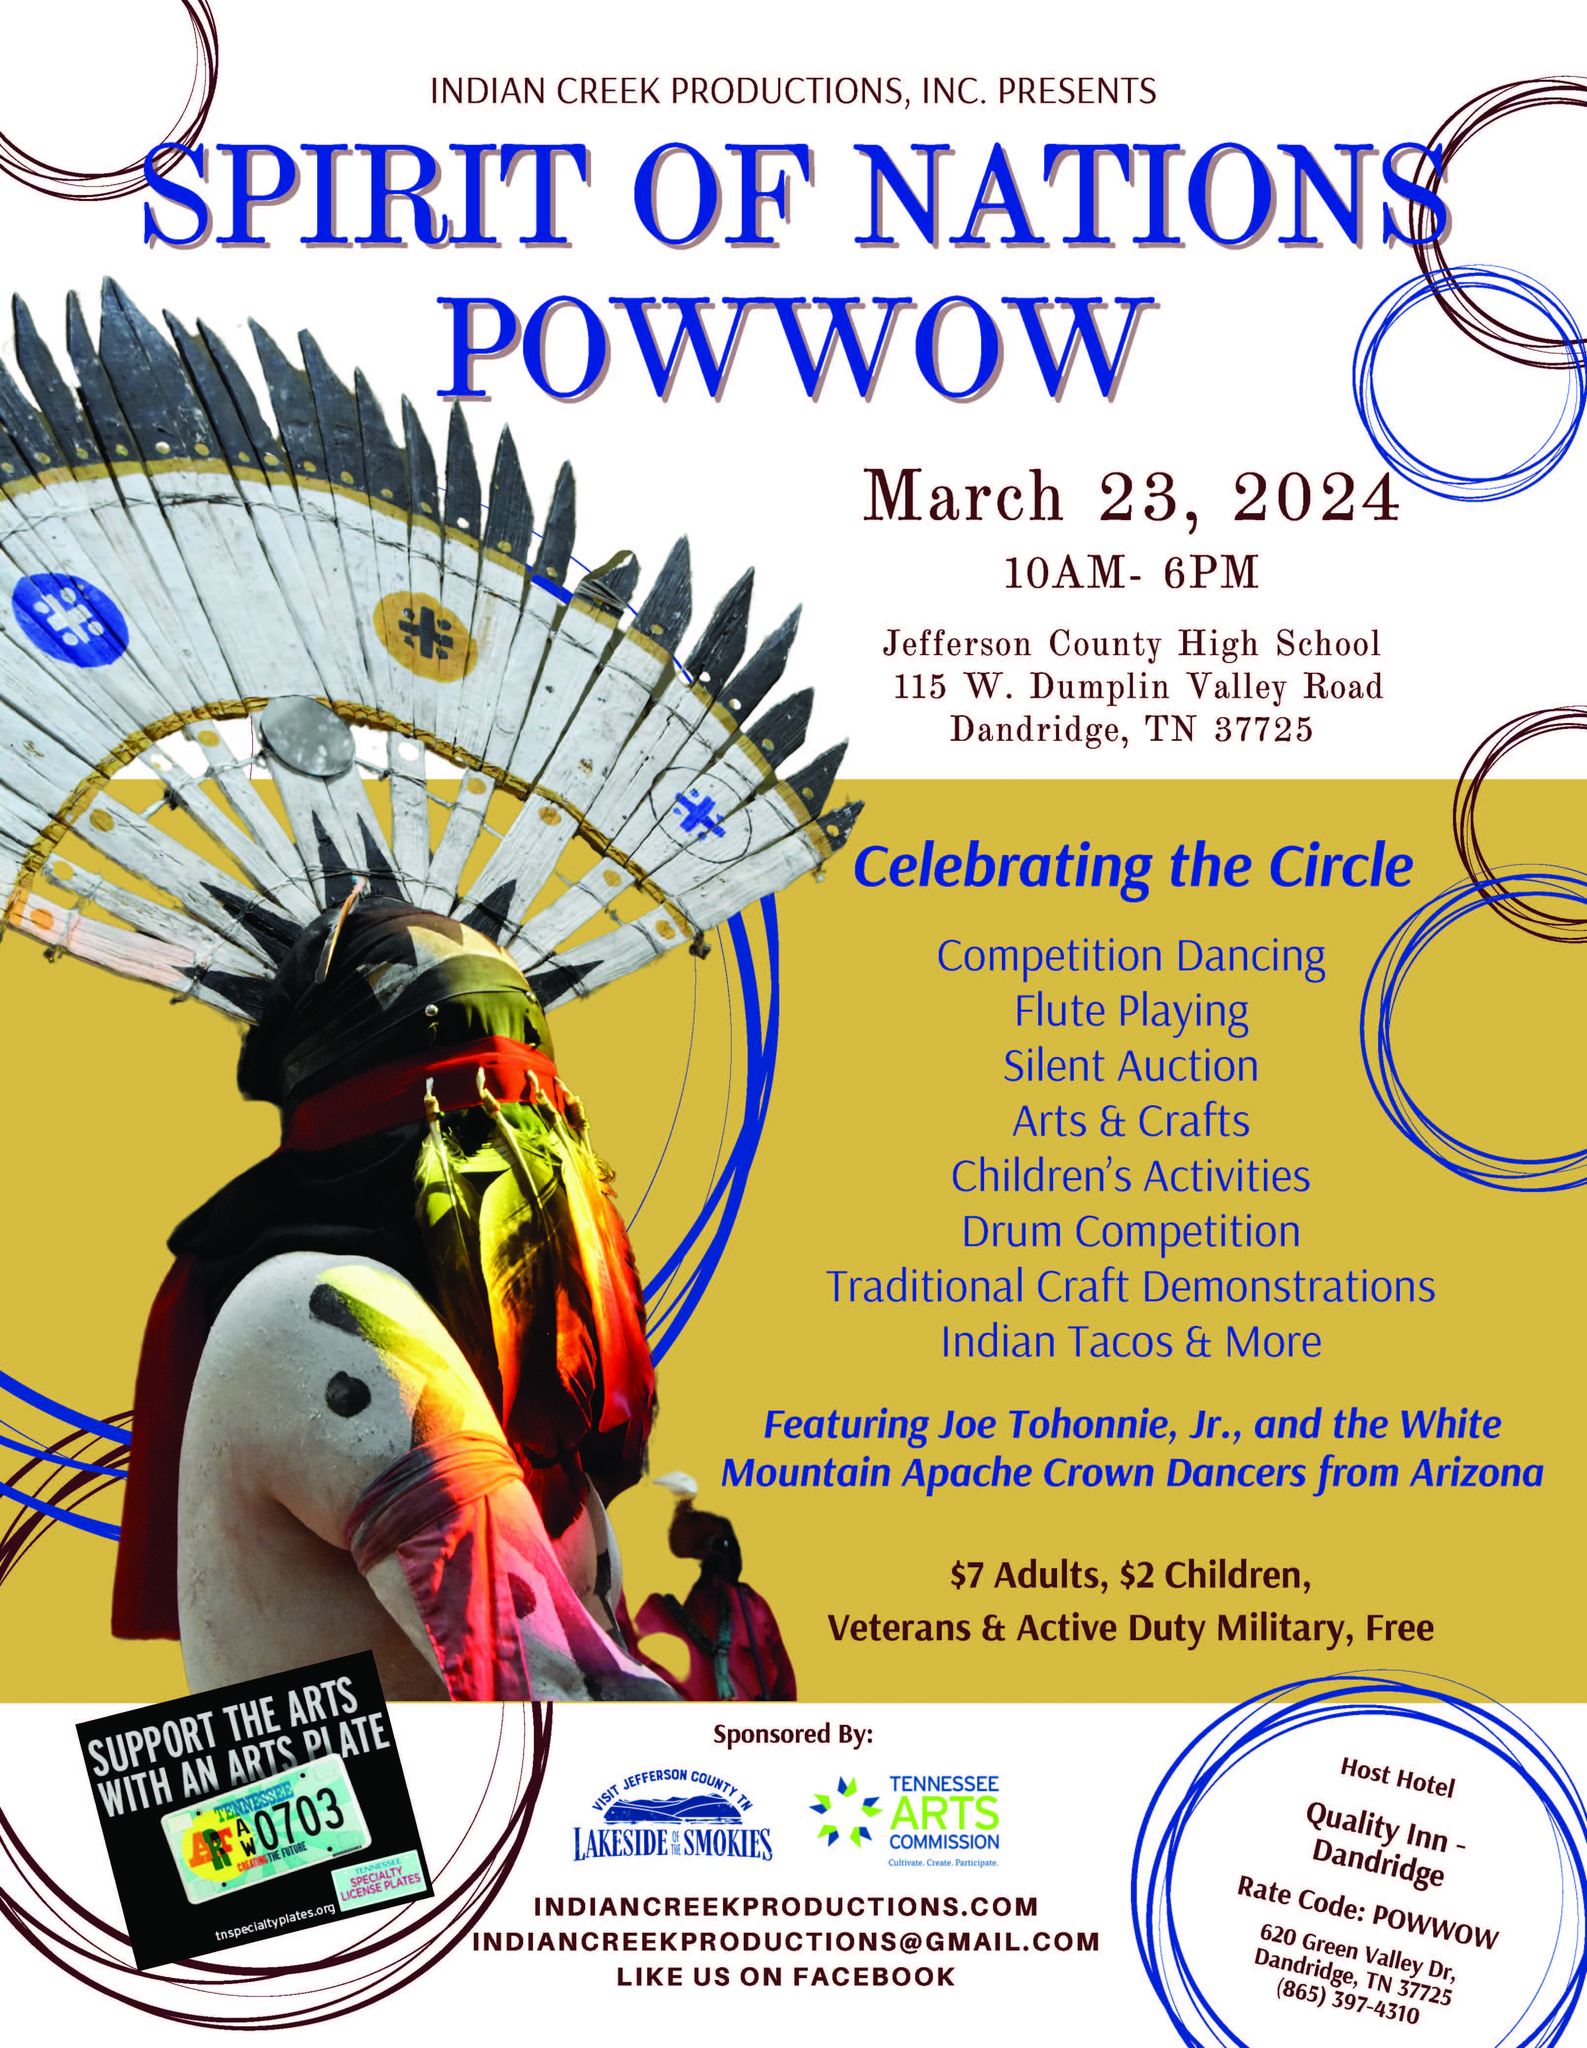 Powwow Event Poster
